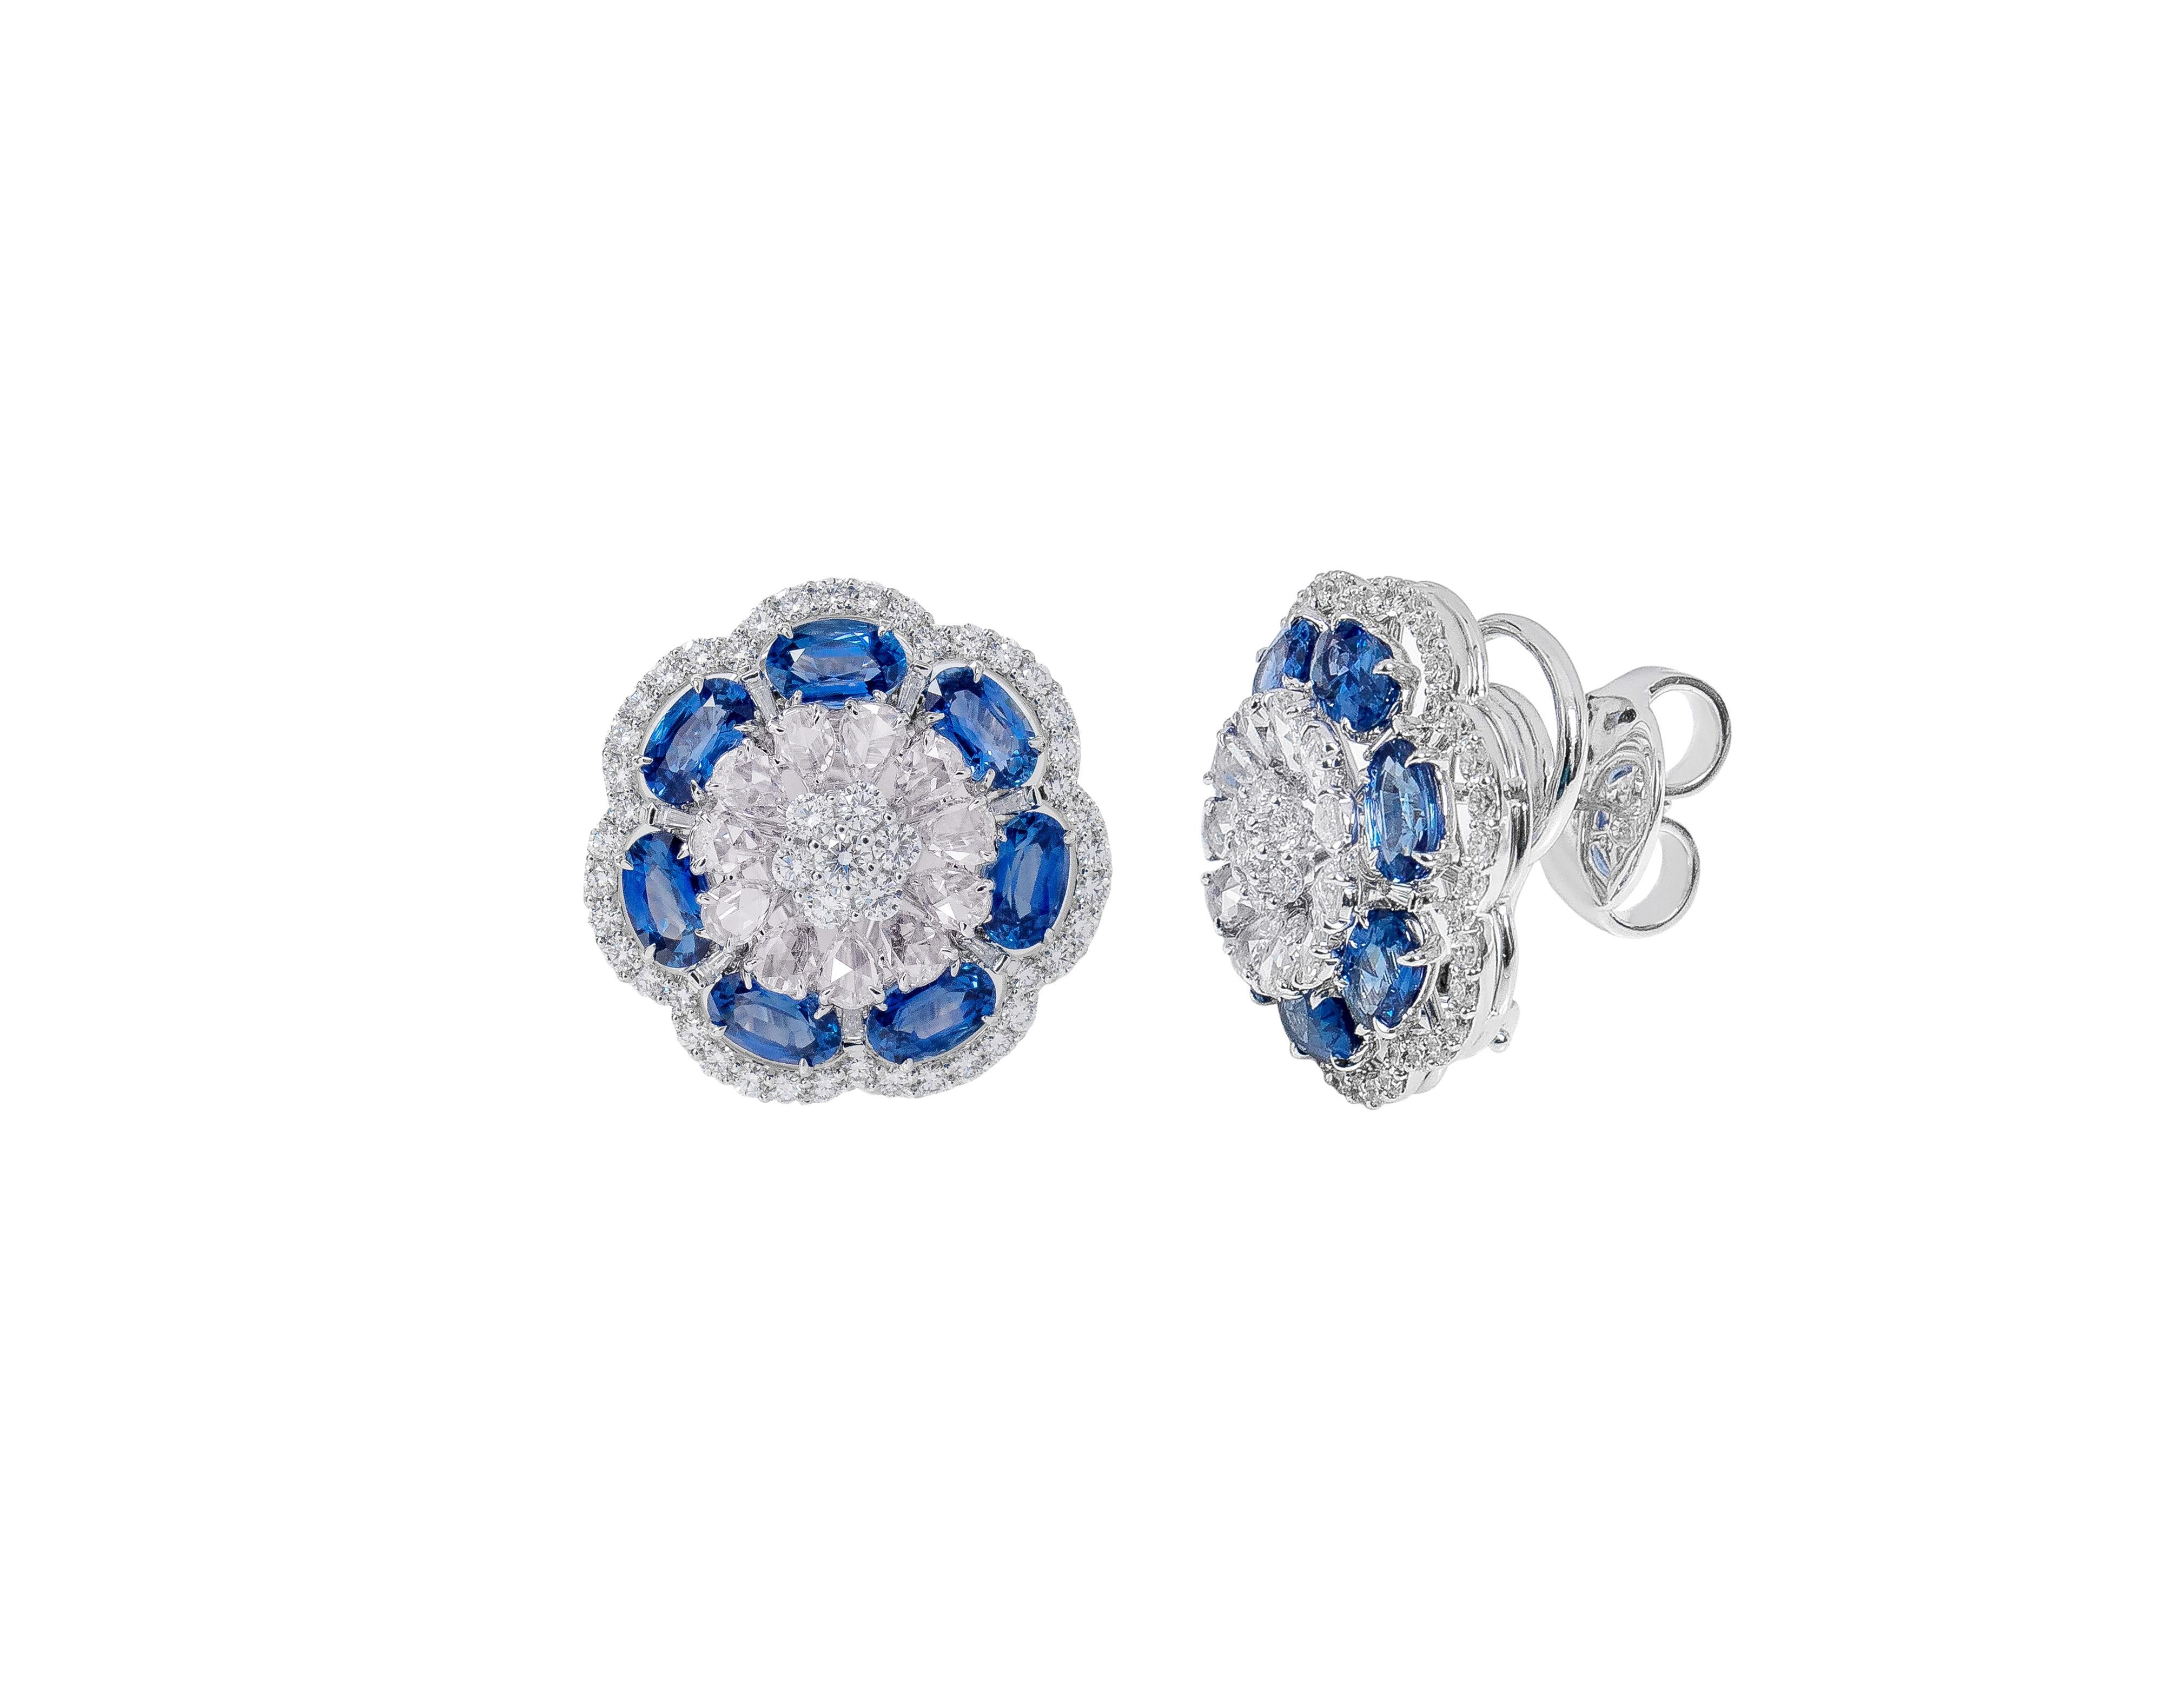 18 Karat White Gold Blue Sapphire and Diamond Contemporary Cluster Stud Earring

These convoluted cornflower blue sapphire ovals with the mix shape and cut of diamonds all layered together extraordinarily define the earring stud. The first layer is